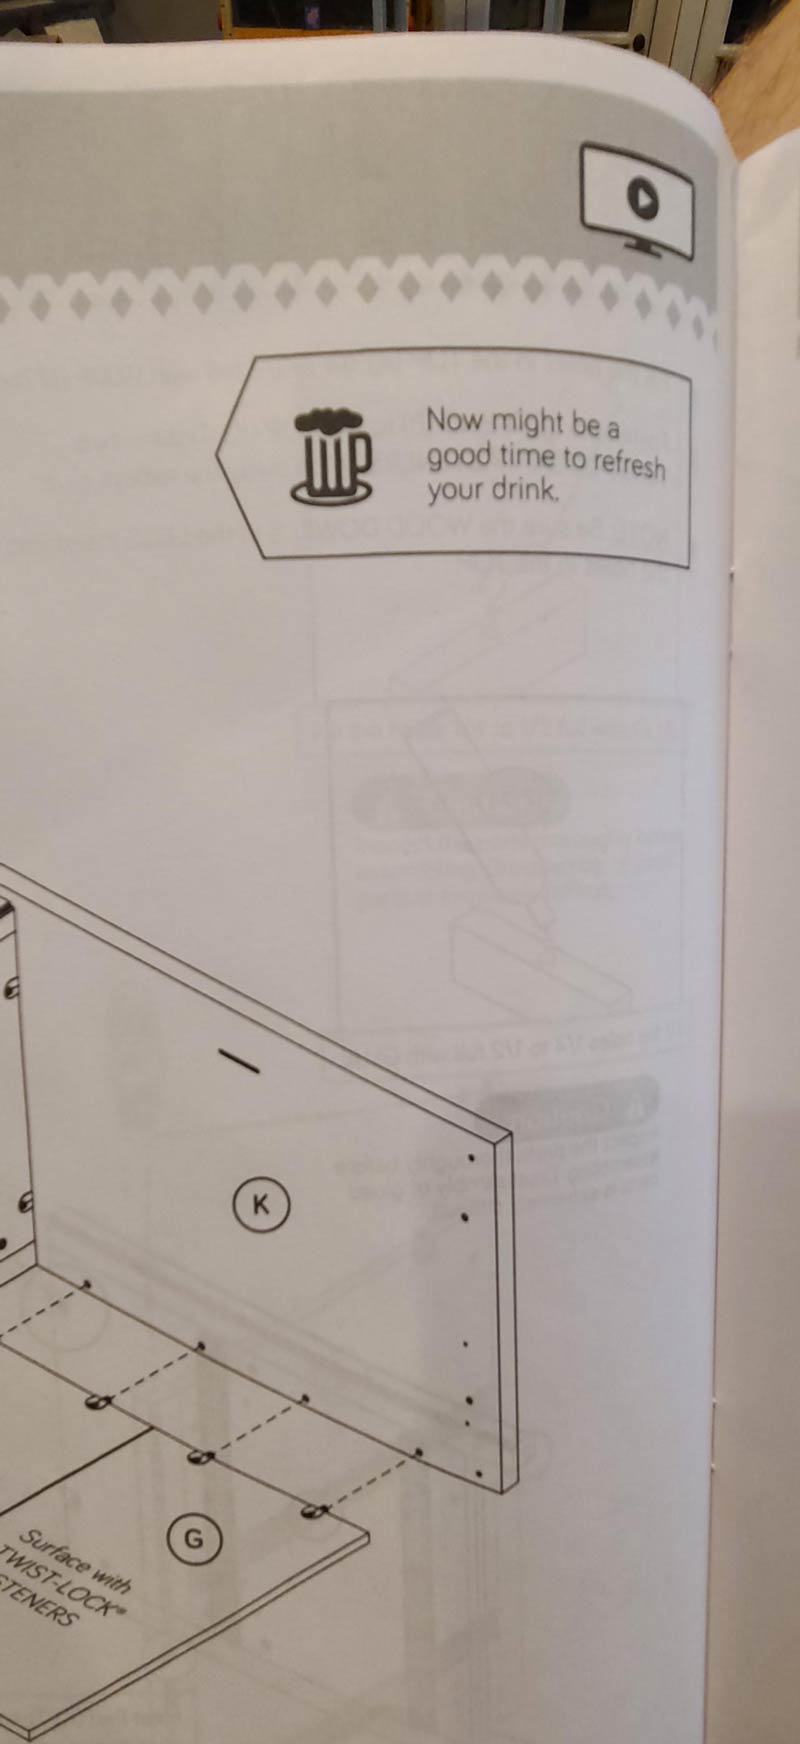 At about a quarter way through the instructions and they are already suggesting a booze break. I guess it does make it easier to get the peg in the hole